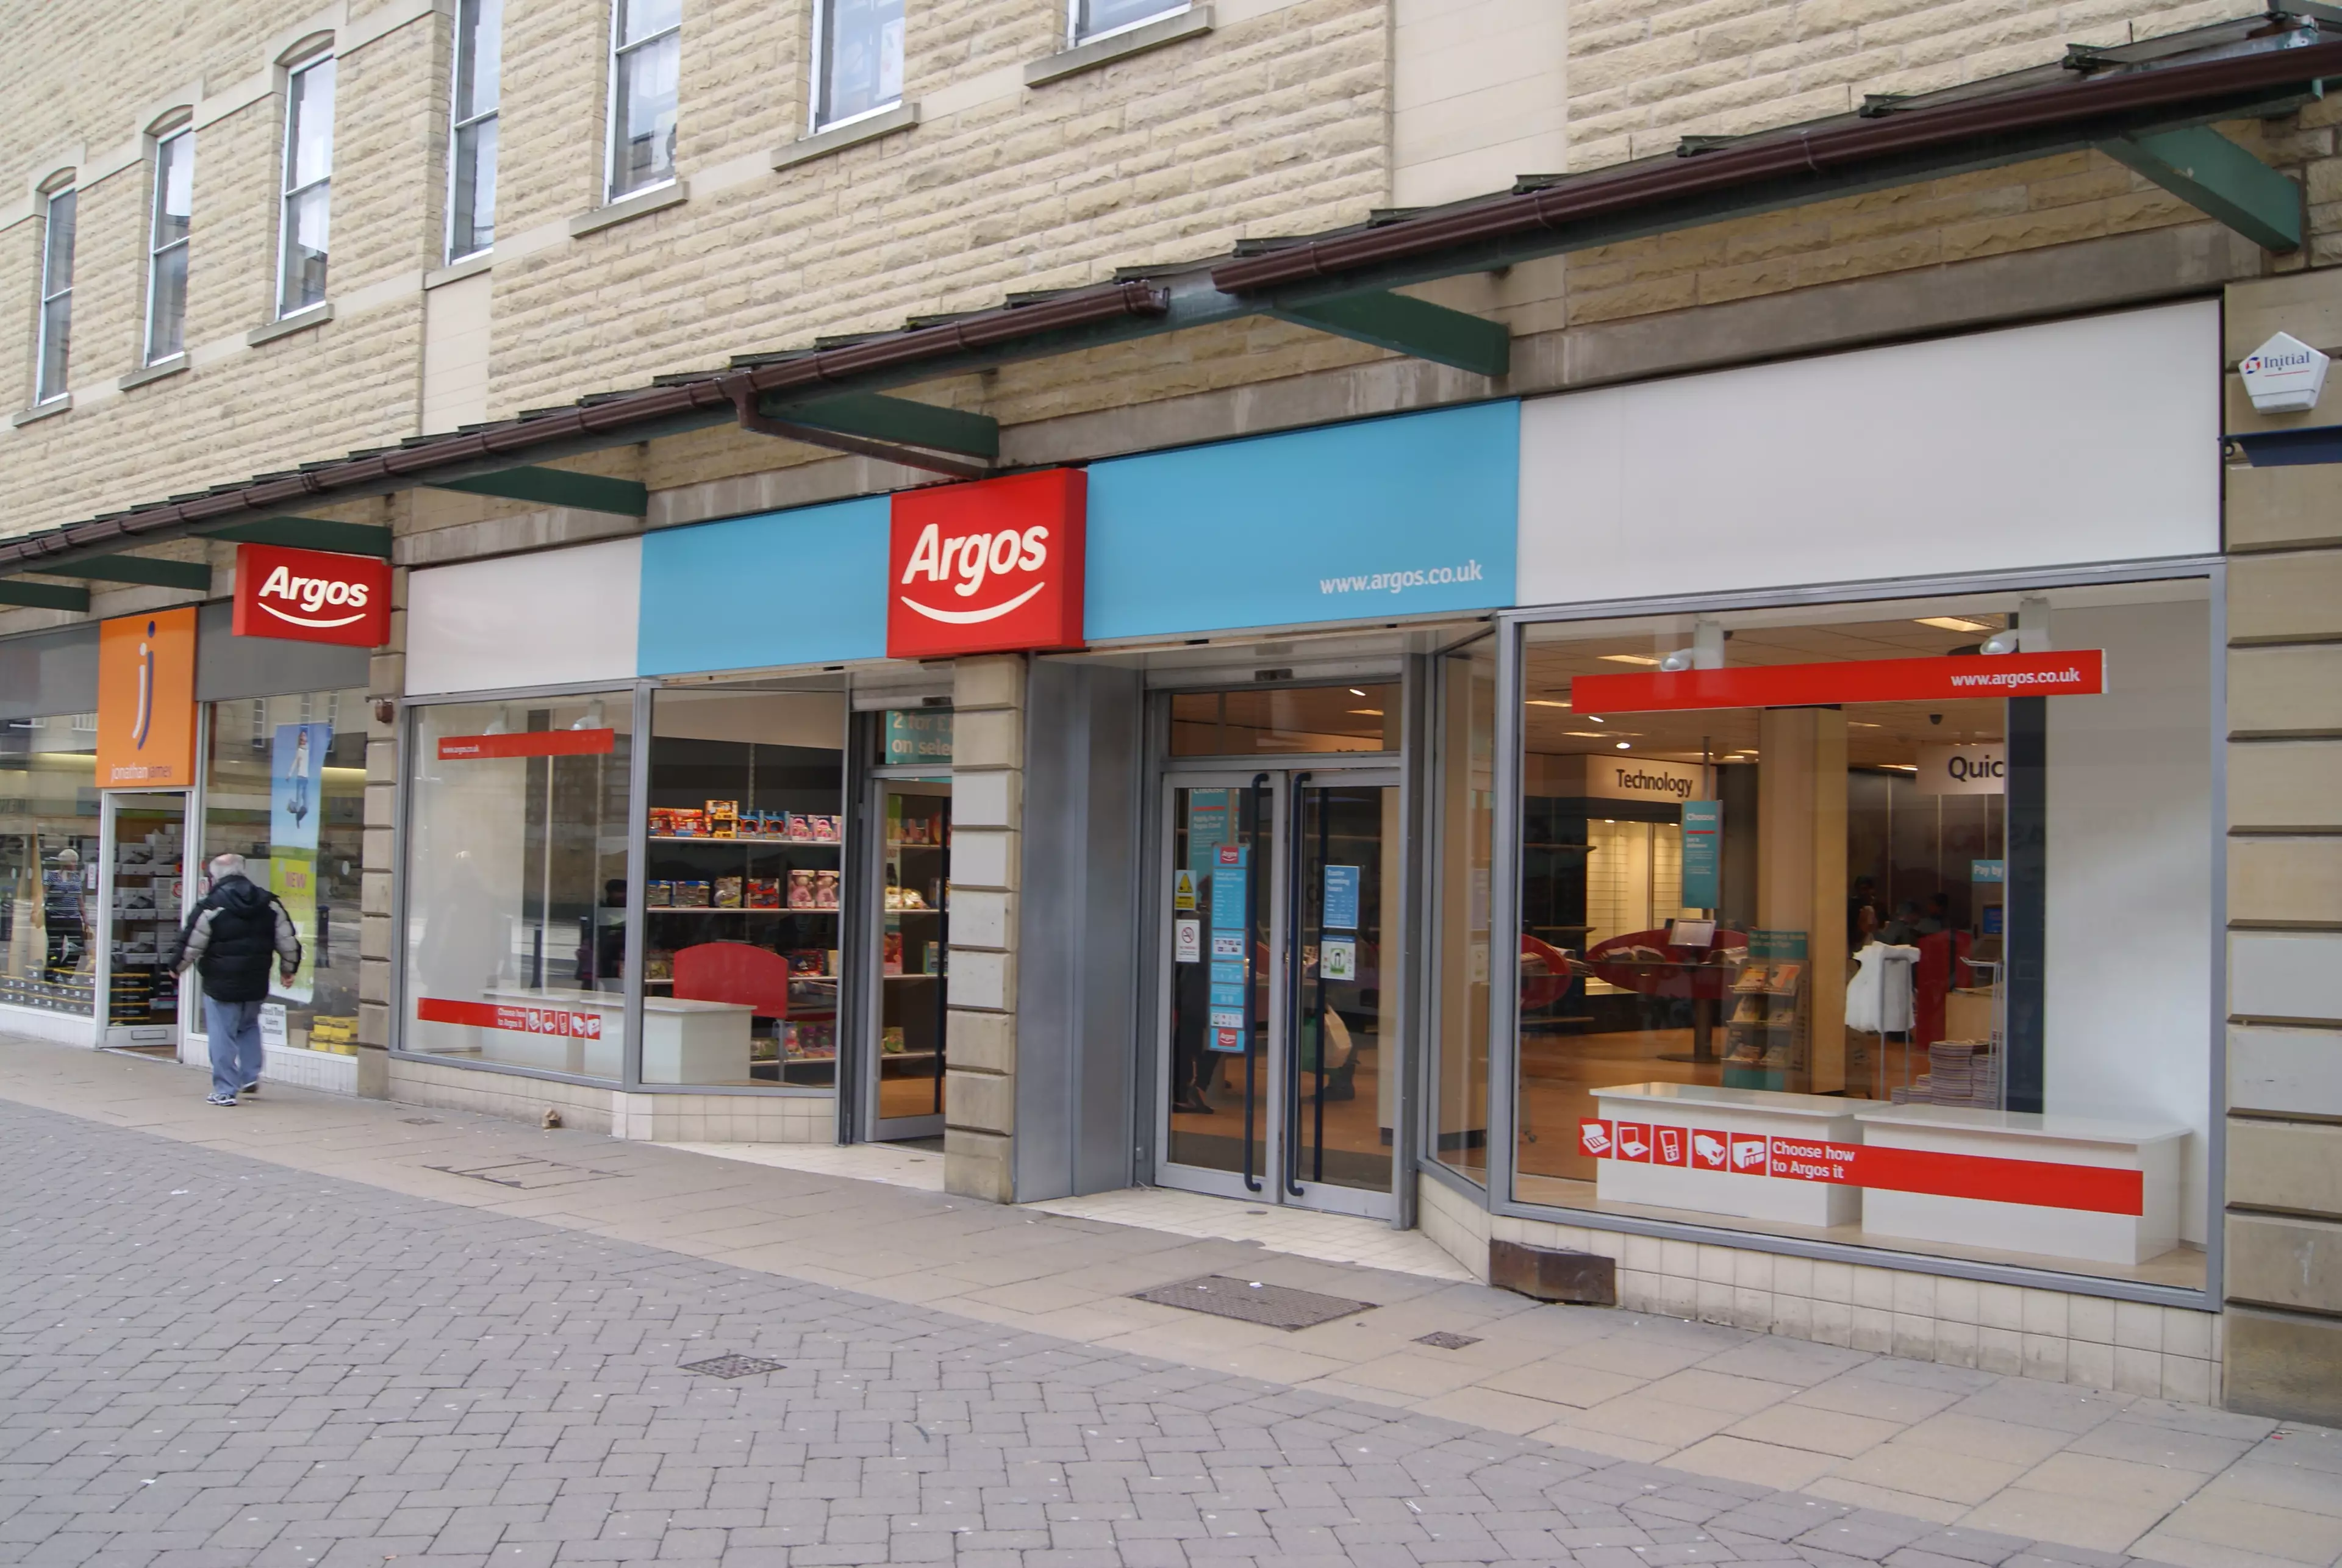 With many customers turning to online shopping, Argos is scrapping its print catalogue (